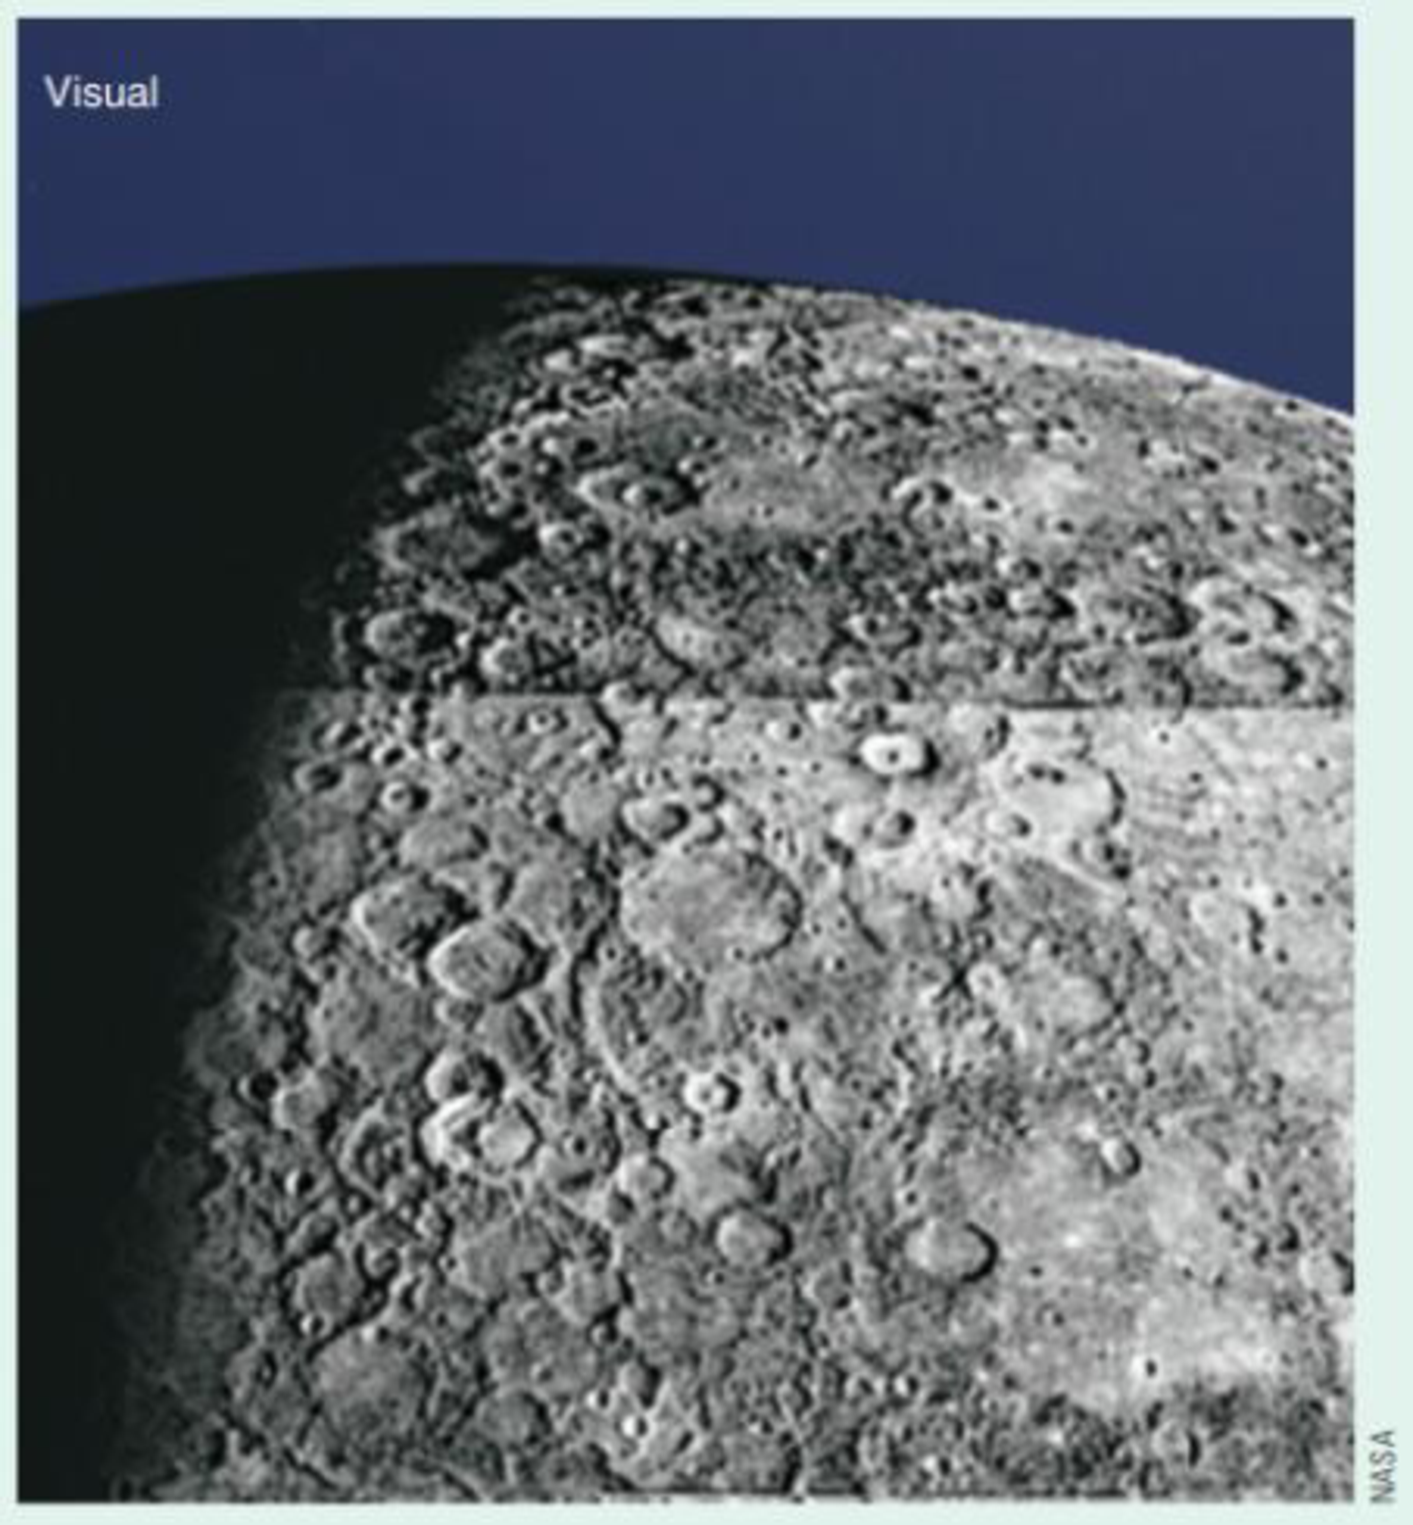 Chapter 18, Problem 2LTL, Why do astronomers conclude that the surface of Mercury, shown here, is old? When did the majority 